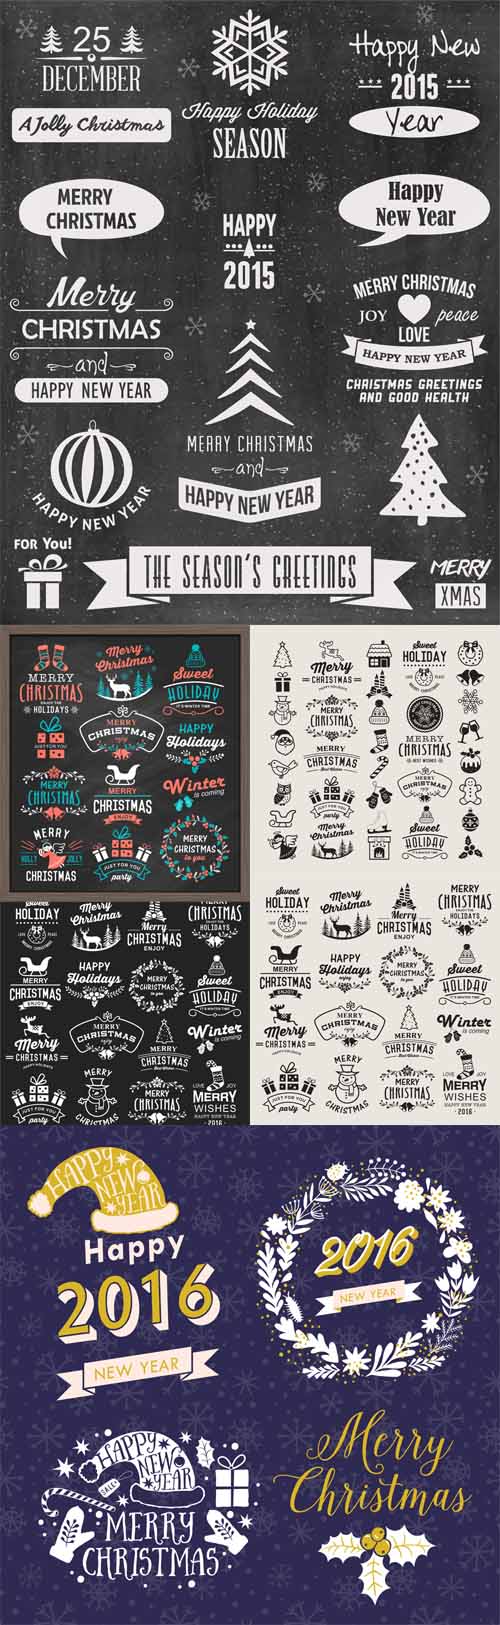 Vector Christmas design elements, logos, badges, labels, icons decoration and object set 3